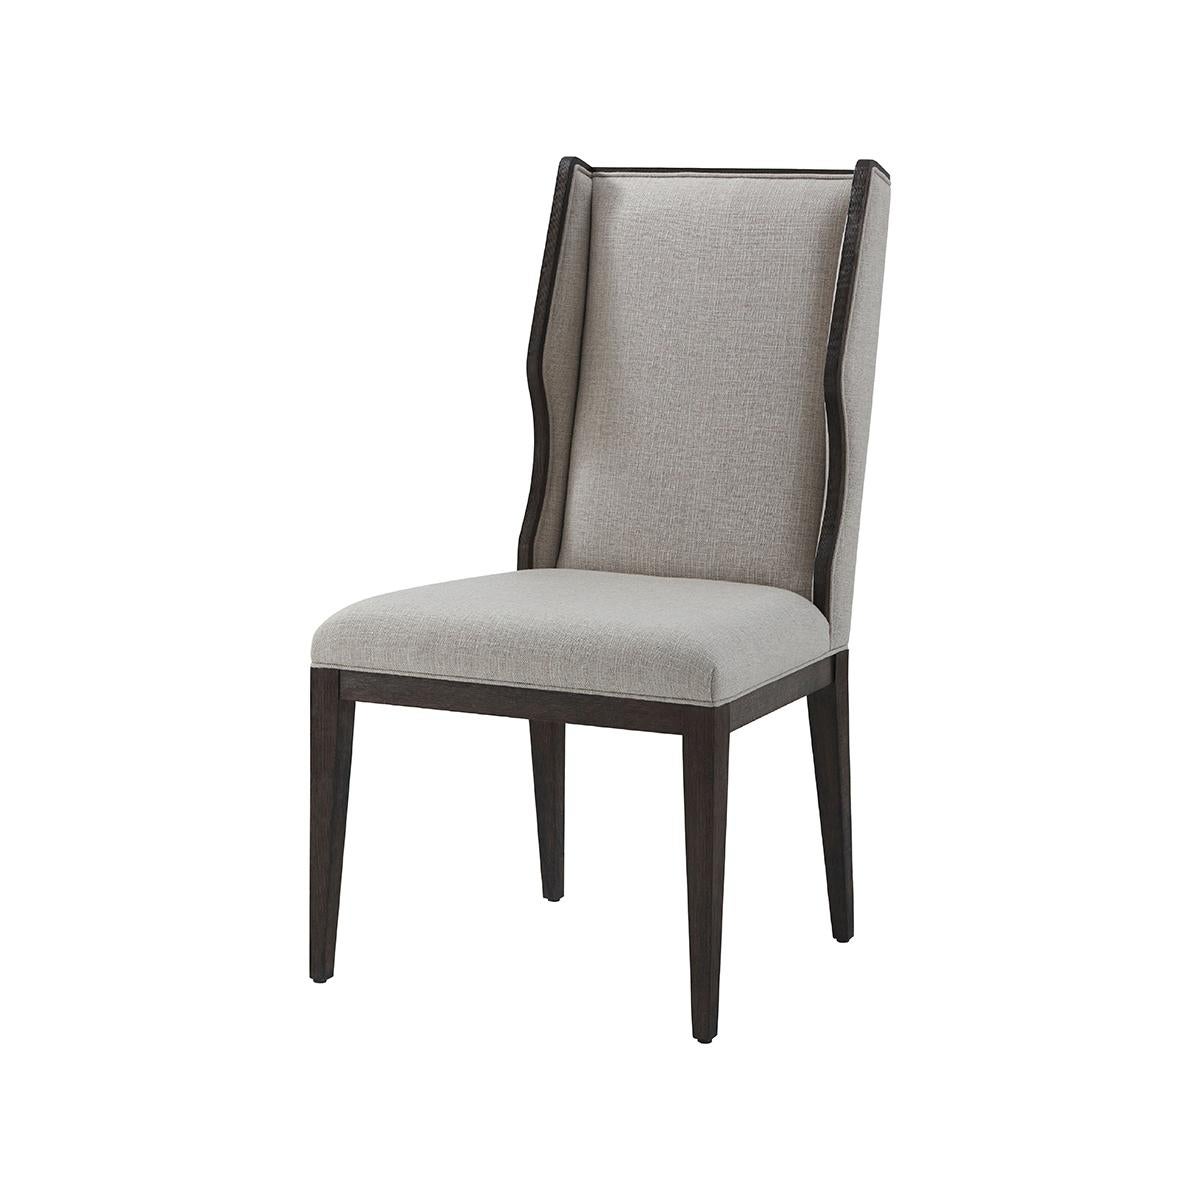 with a dark cardamon finish textured beech frame, a high back winged backrest and upholstered in performance fabric.

Dimensions: 22